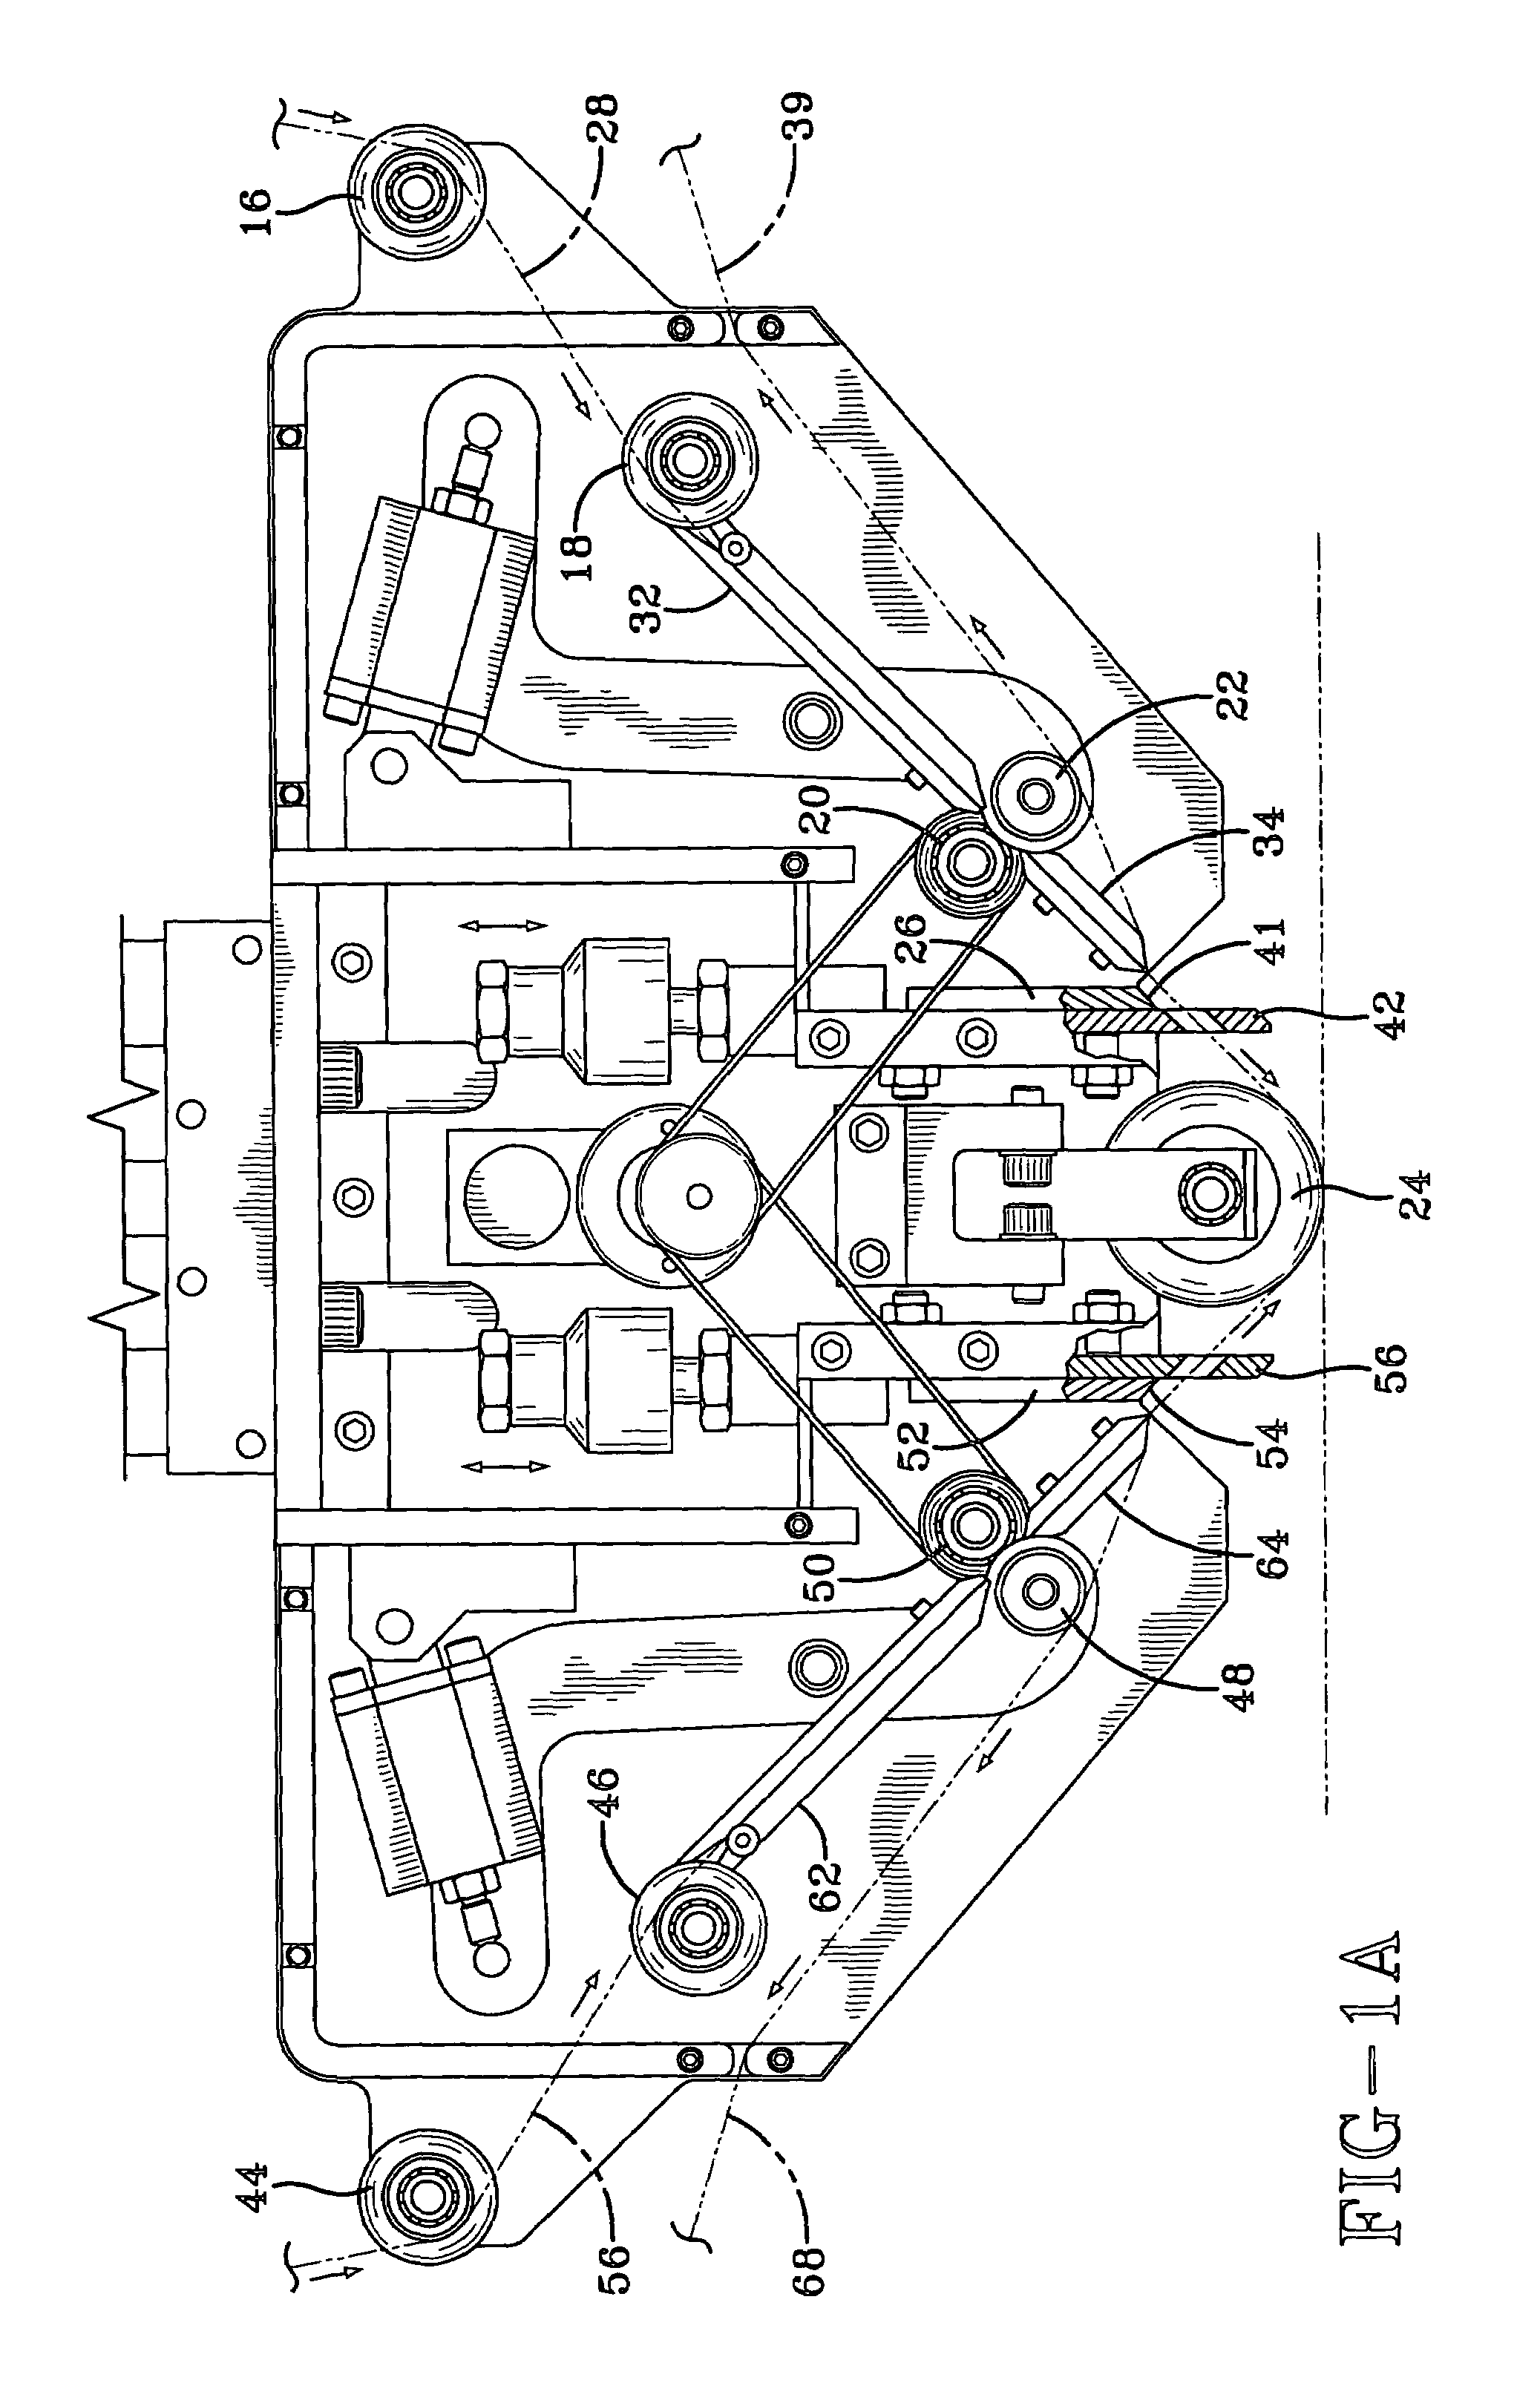 Multiple tape laying apparatus and method